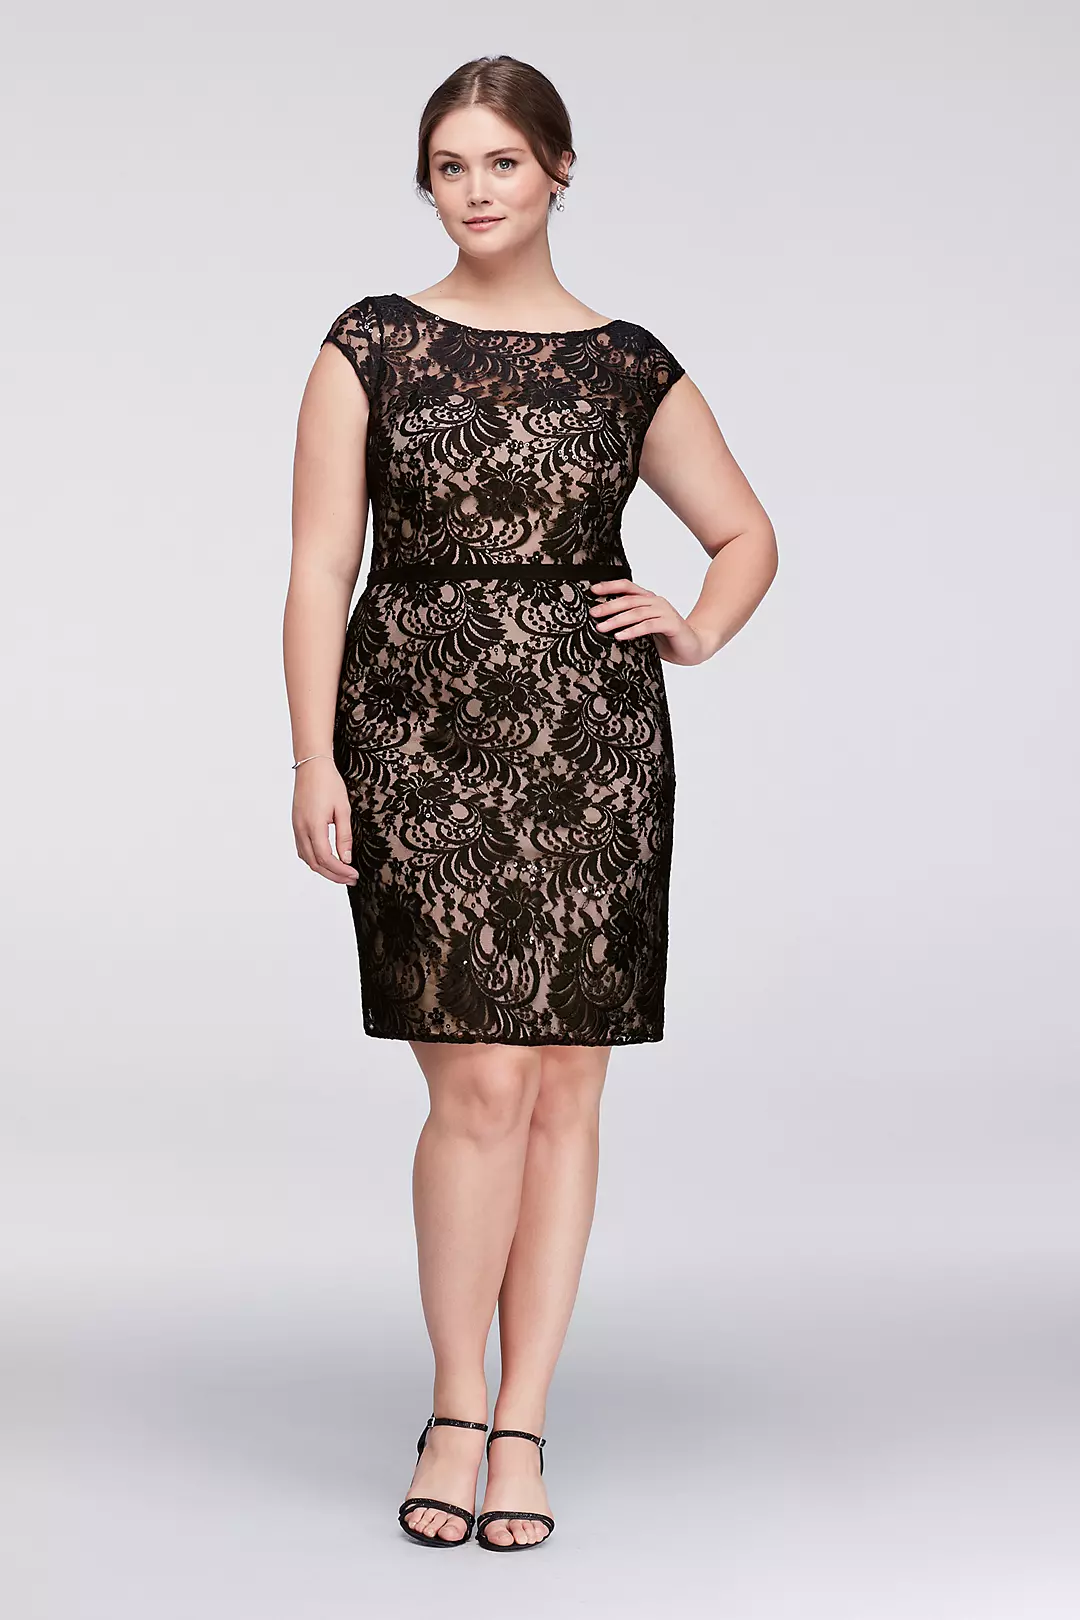 Illusion Lace Cocktail Dress with Ribbon Belt Image